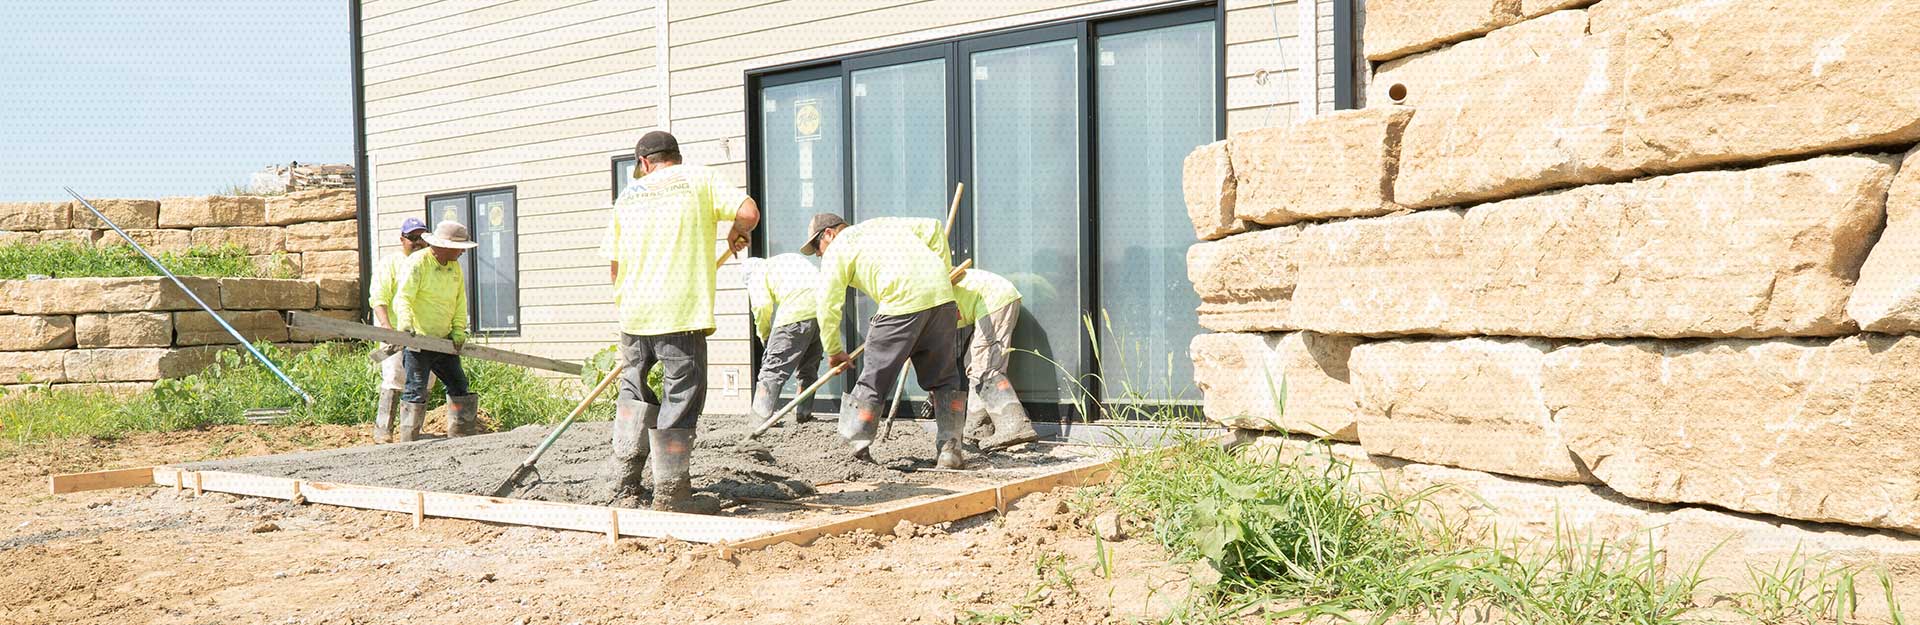 A crew of AM Contracting employees working on a new patio porch for a residential client as wet cement is being shifted around inside a wooden barrier.